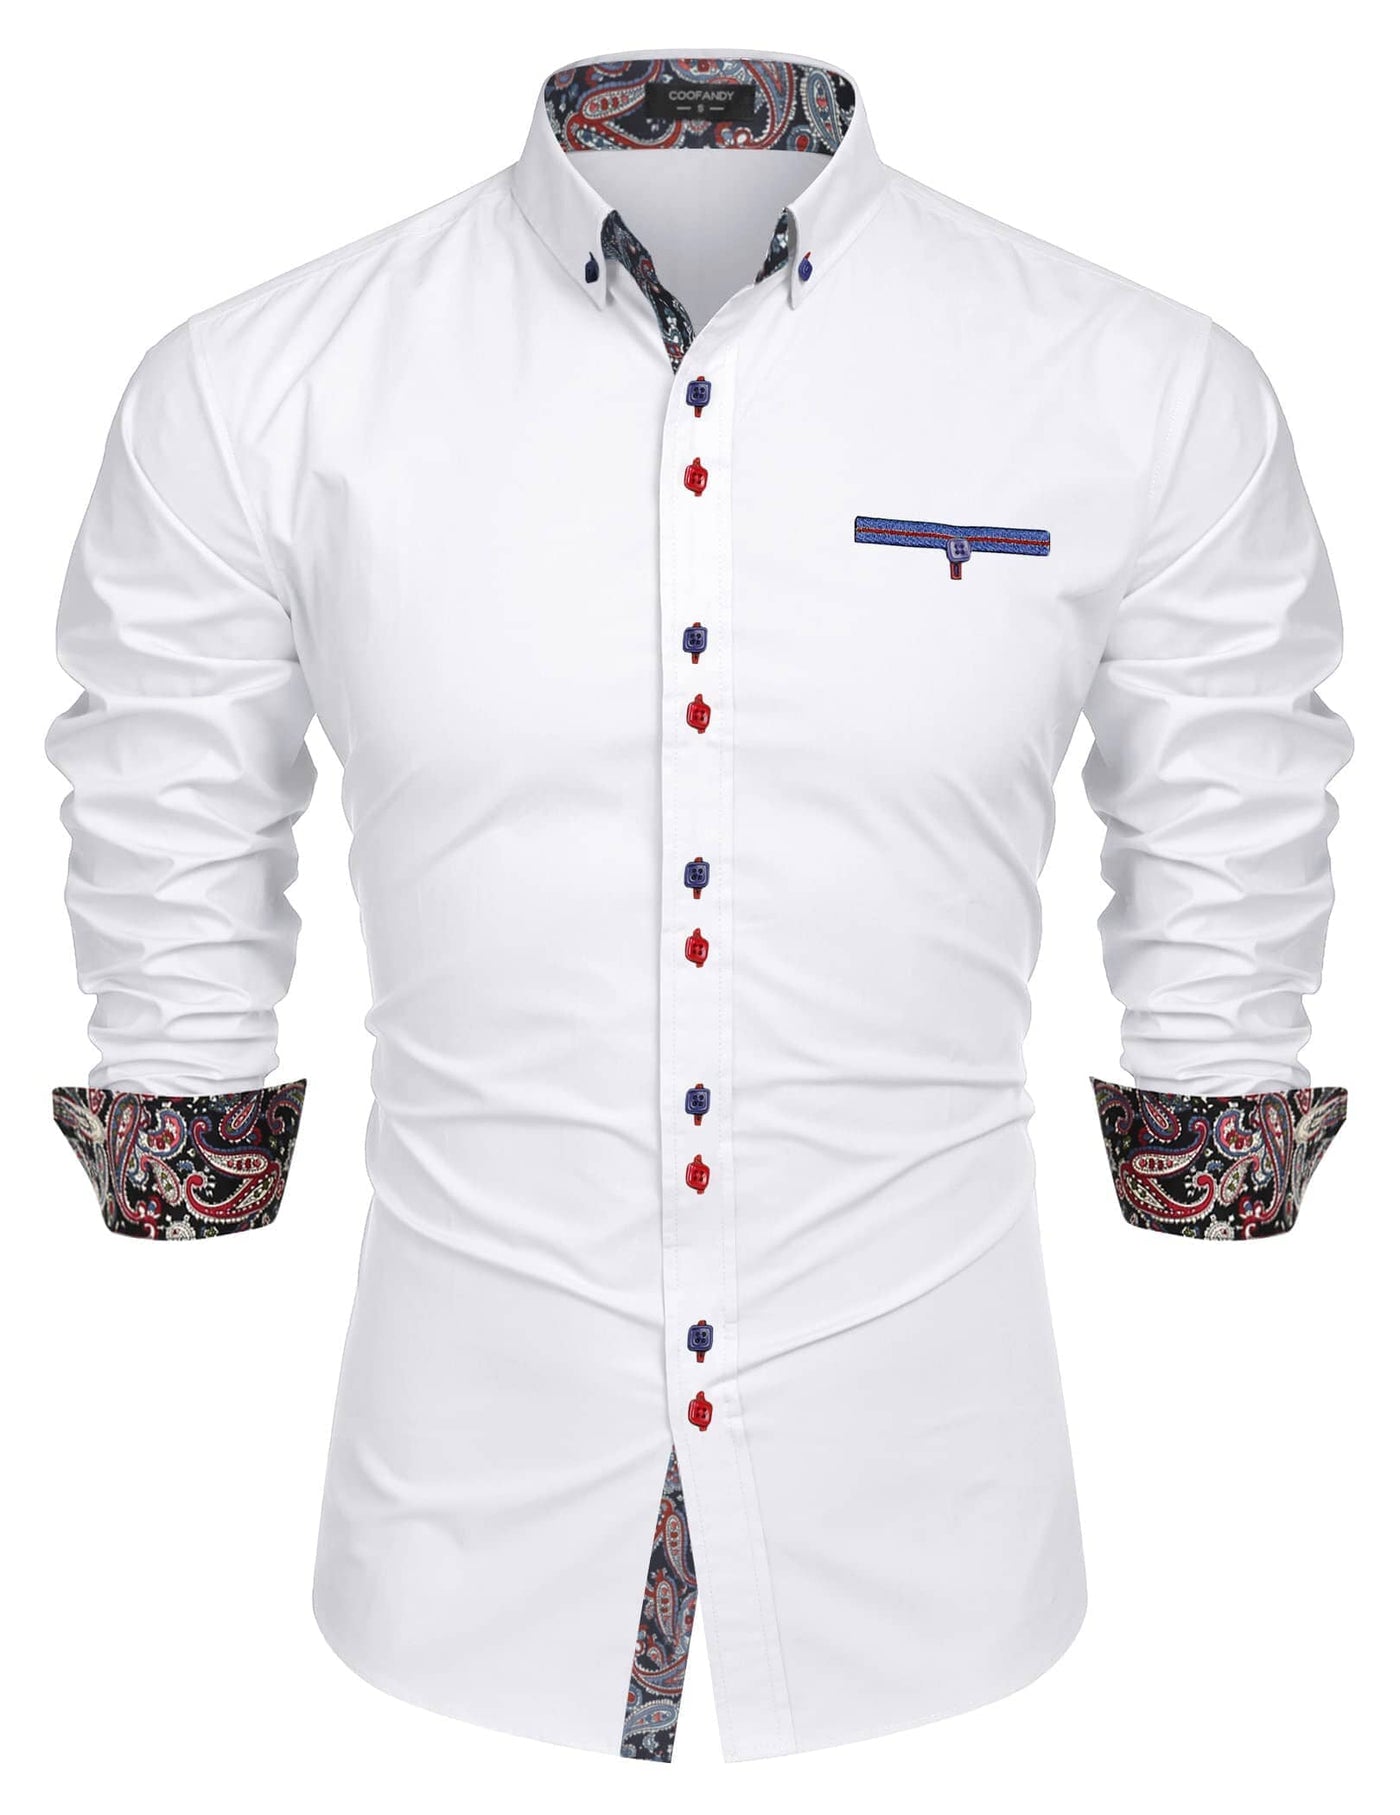 Coofandy Dress Button Down Shirts (US Only) Shirts coofandy White S 